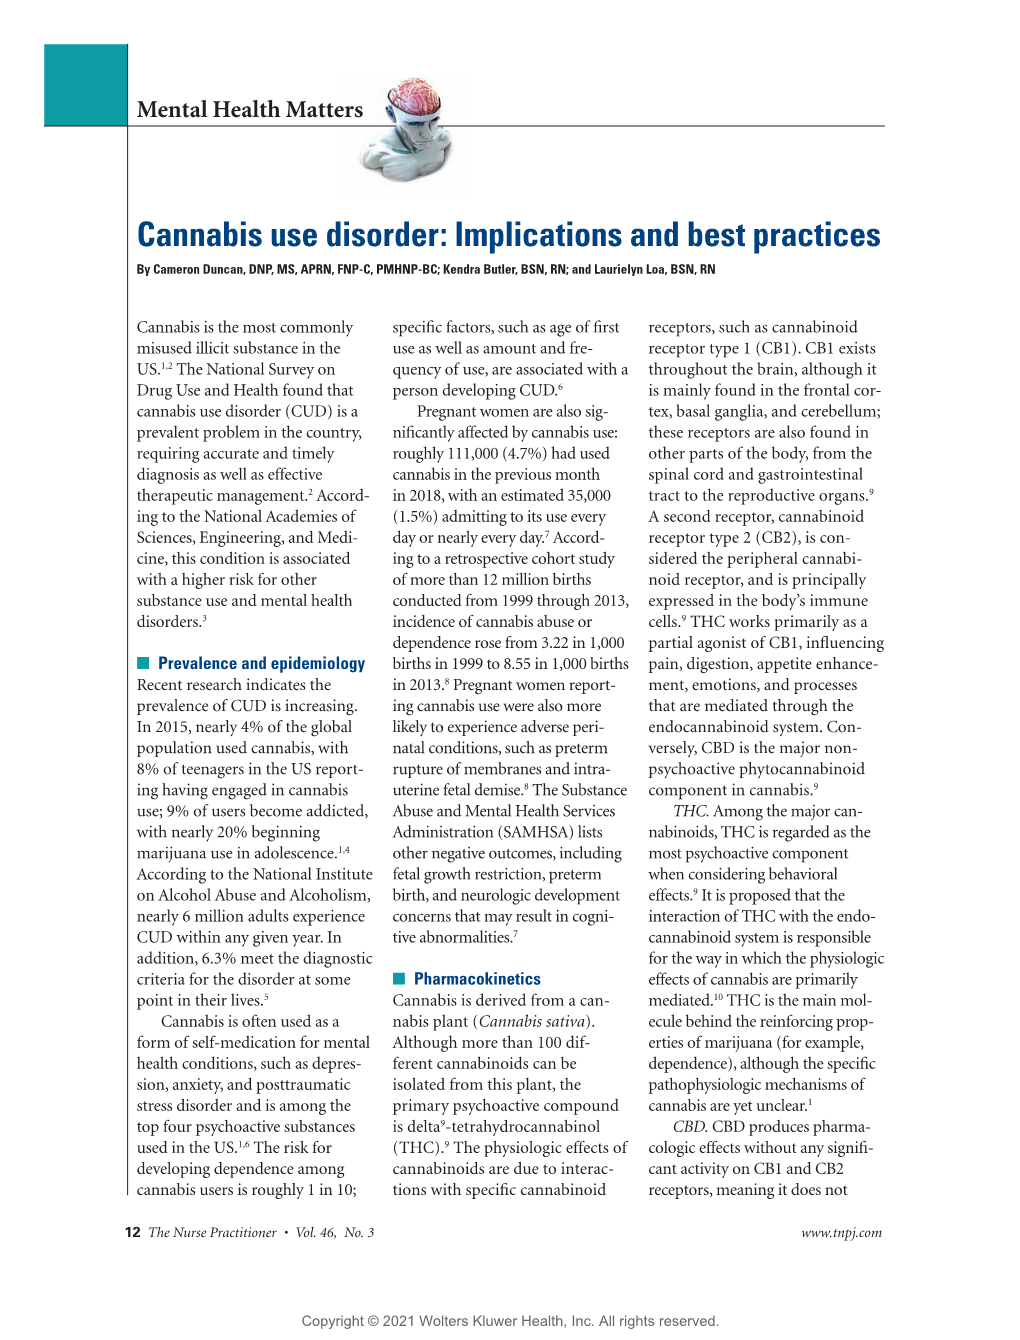 Cannabis Use Disorder: Implications and Best Practices by Cameron Duncan, DNP, MS, APRN, FNP-C, PMHNP-BC; Kendra Butler, BSN, RN; and Laurielyn Loa, BSN, RN